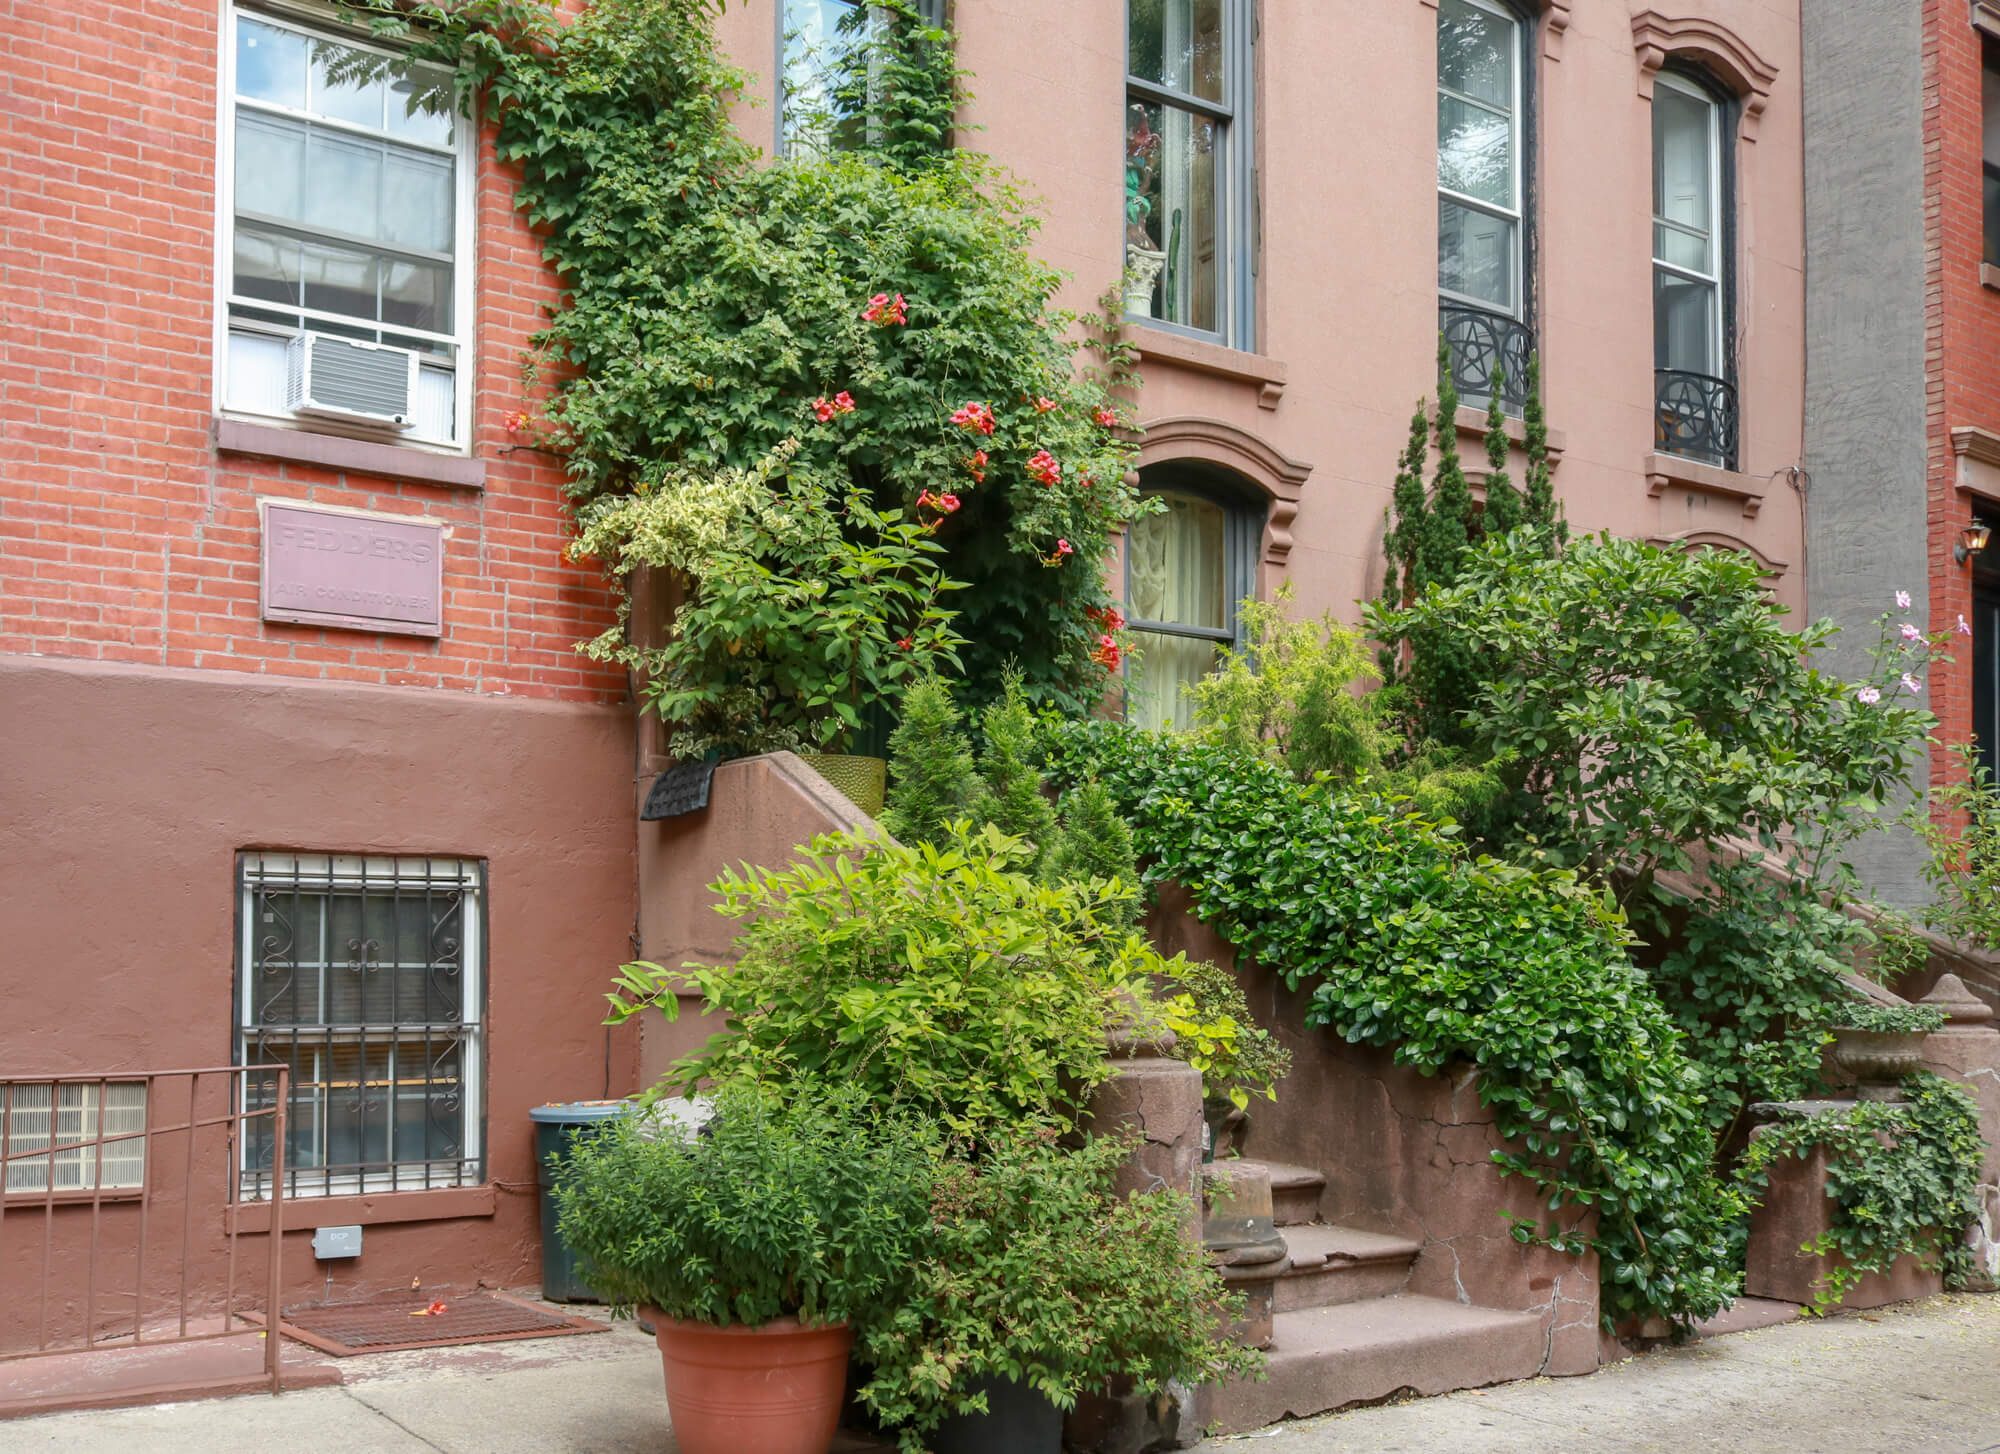 vines on houses brownstone facade